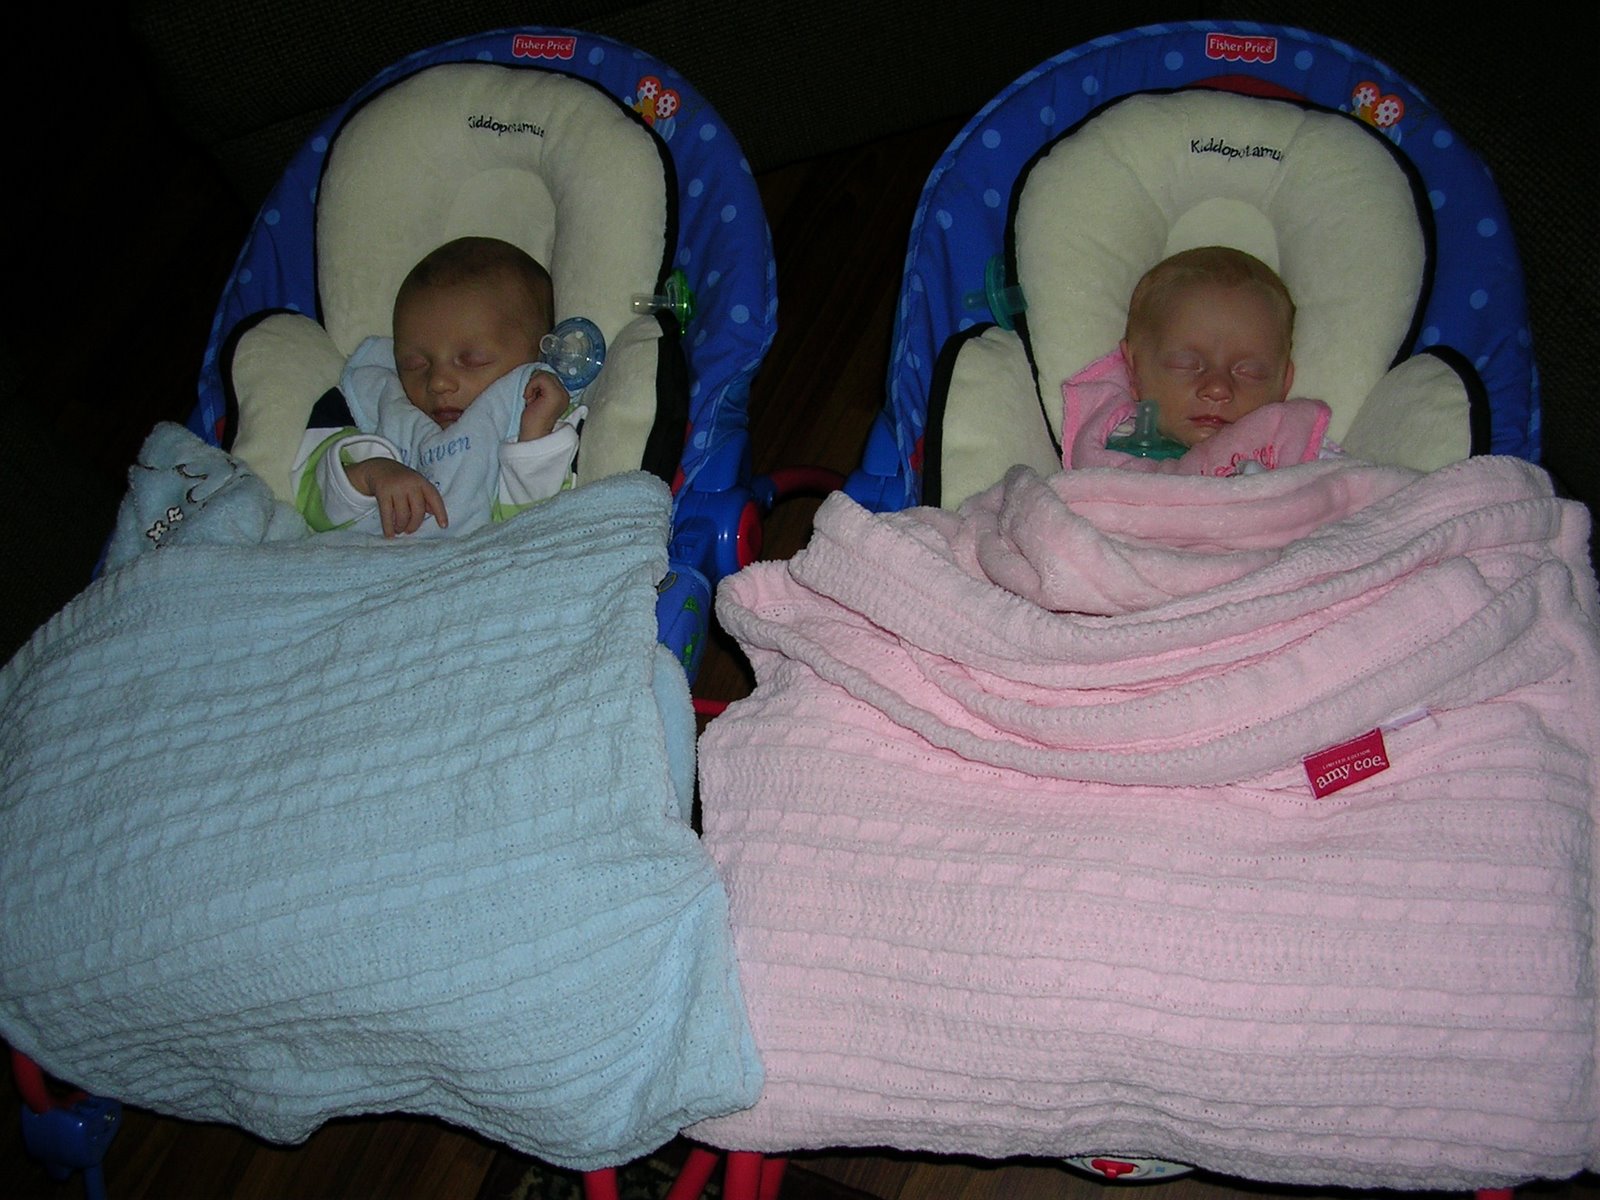 [Twins+in+their+chair]